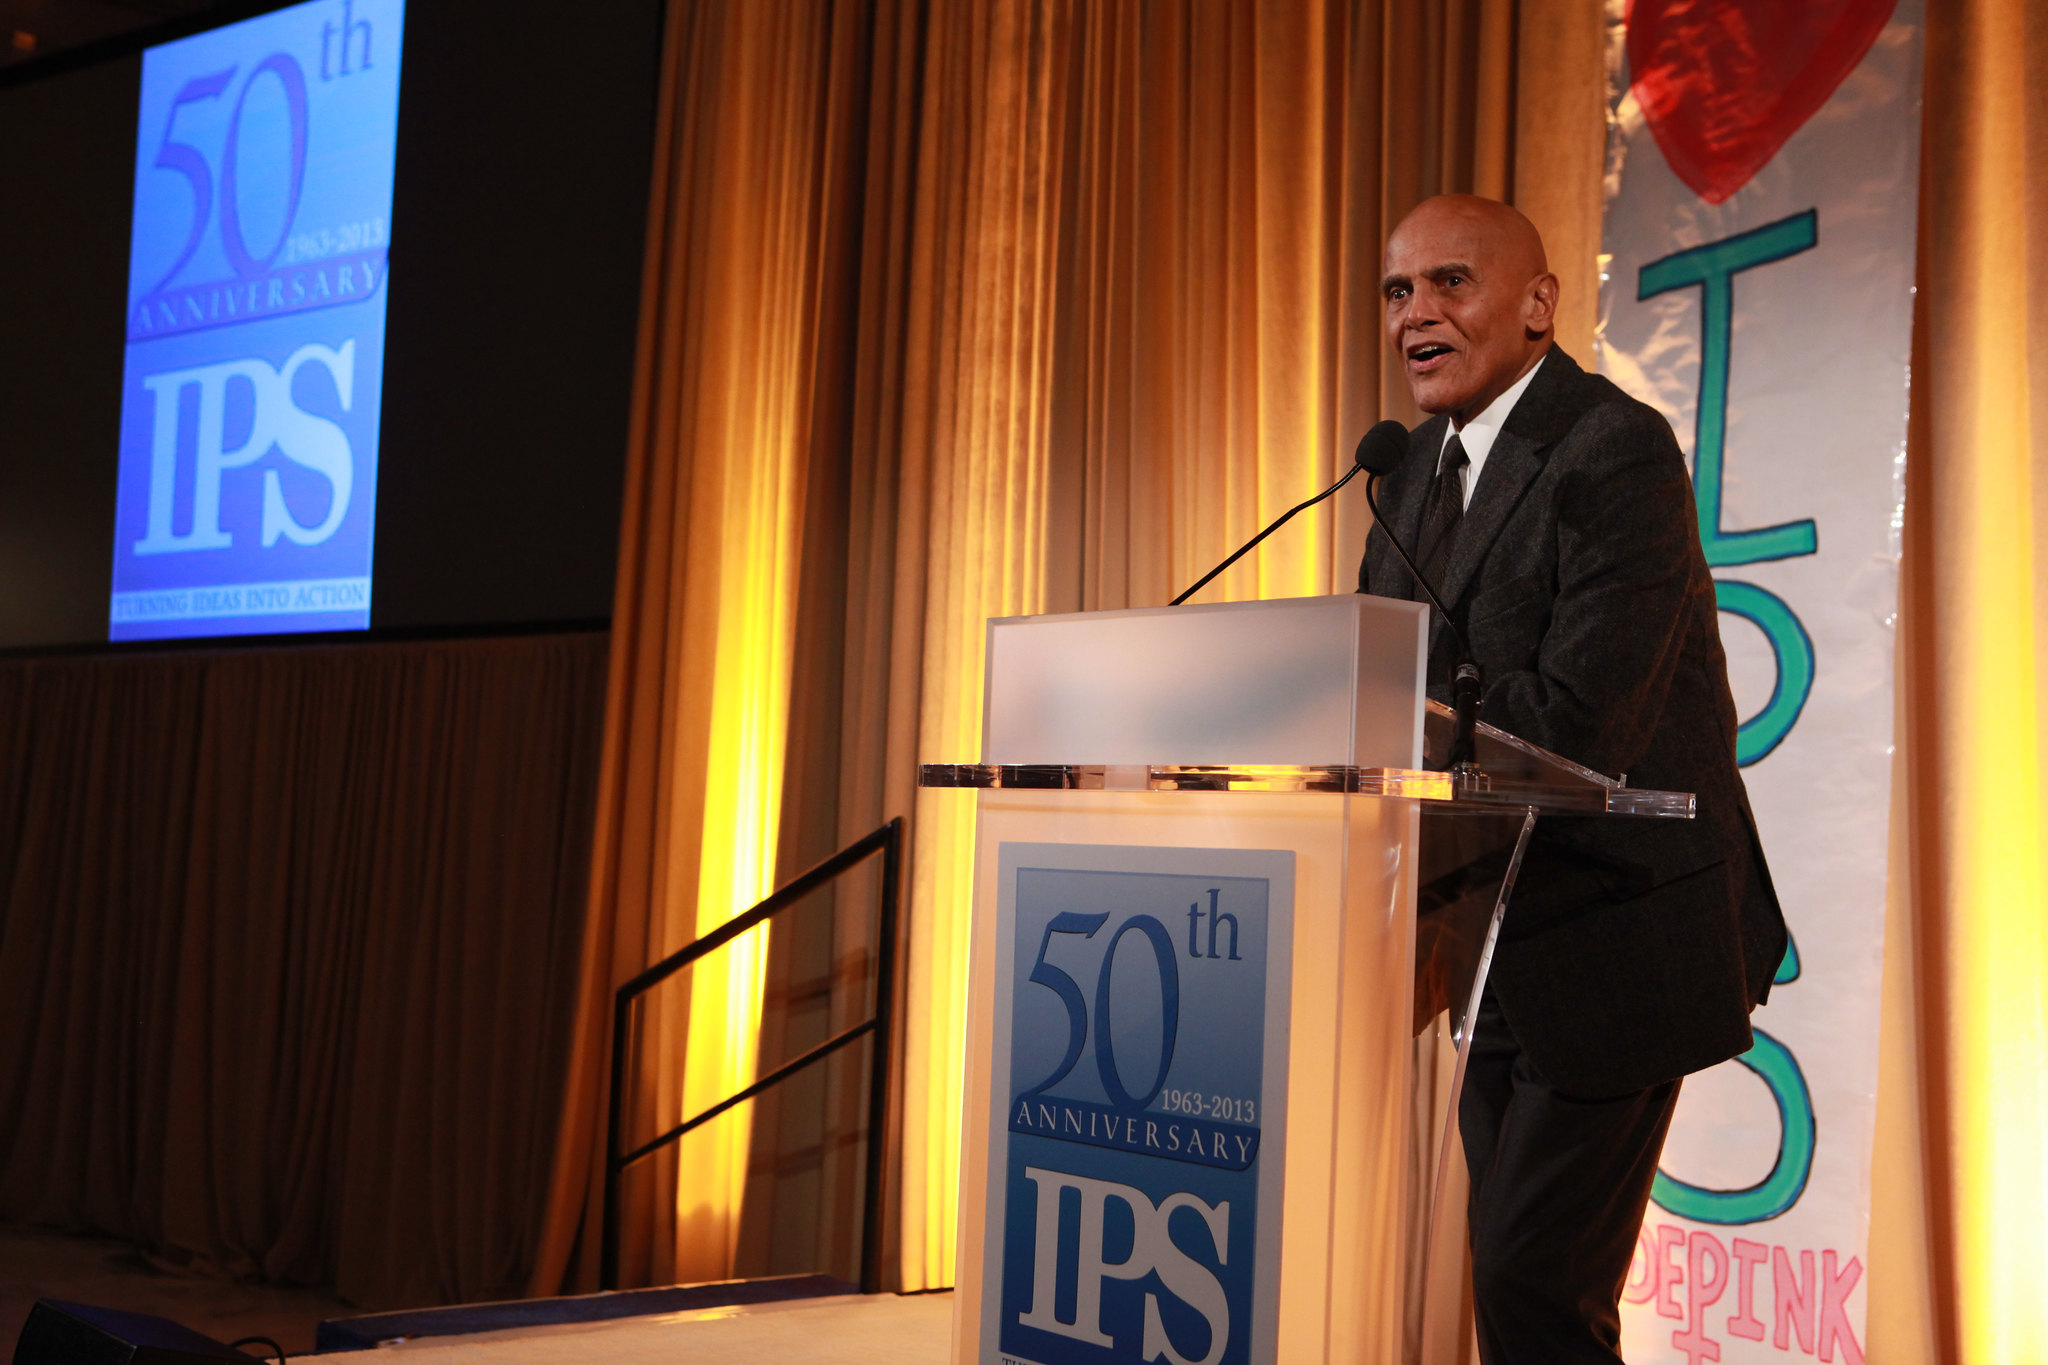 ‘I Don’t Mind the Work’: An IPS Tribute to Harry Belafonte